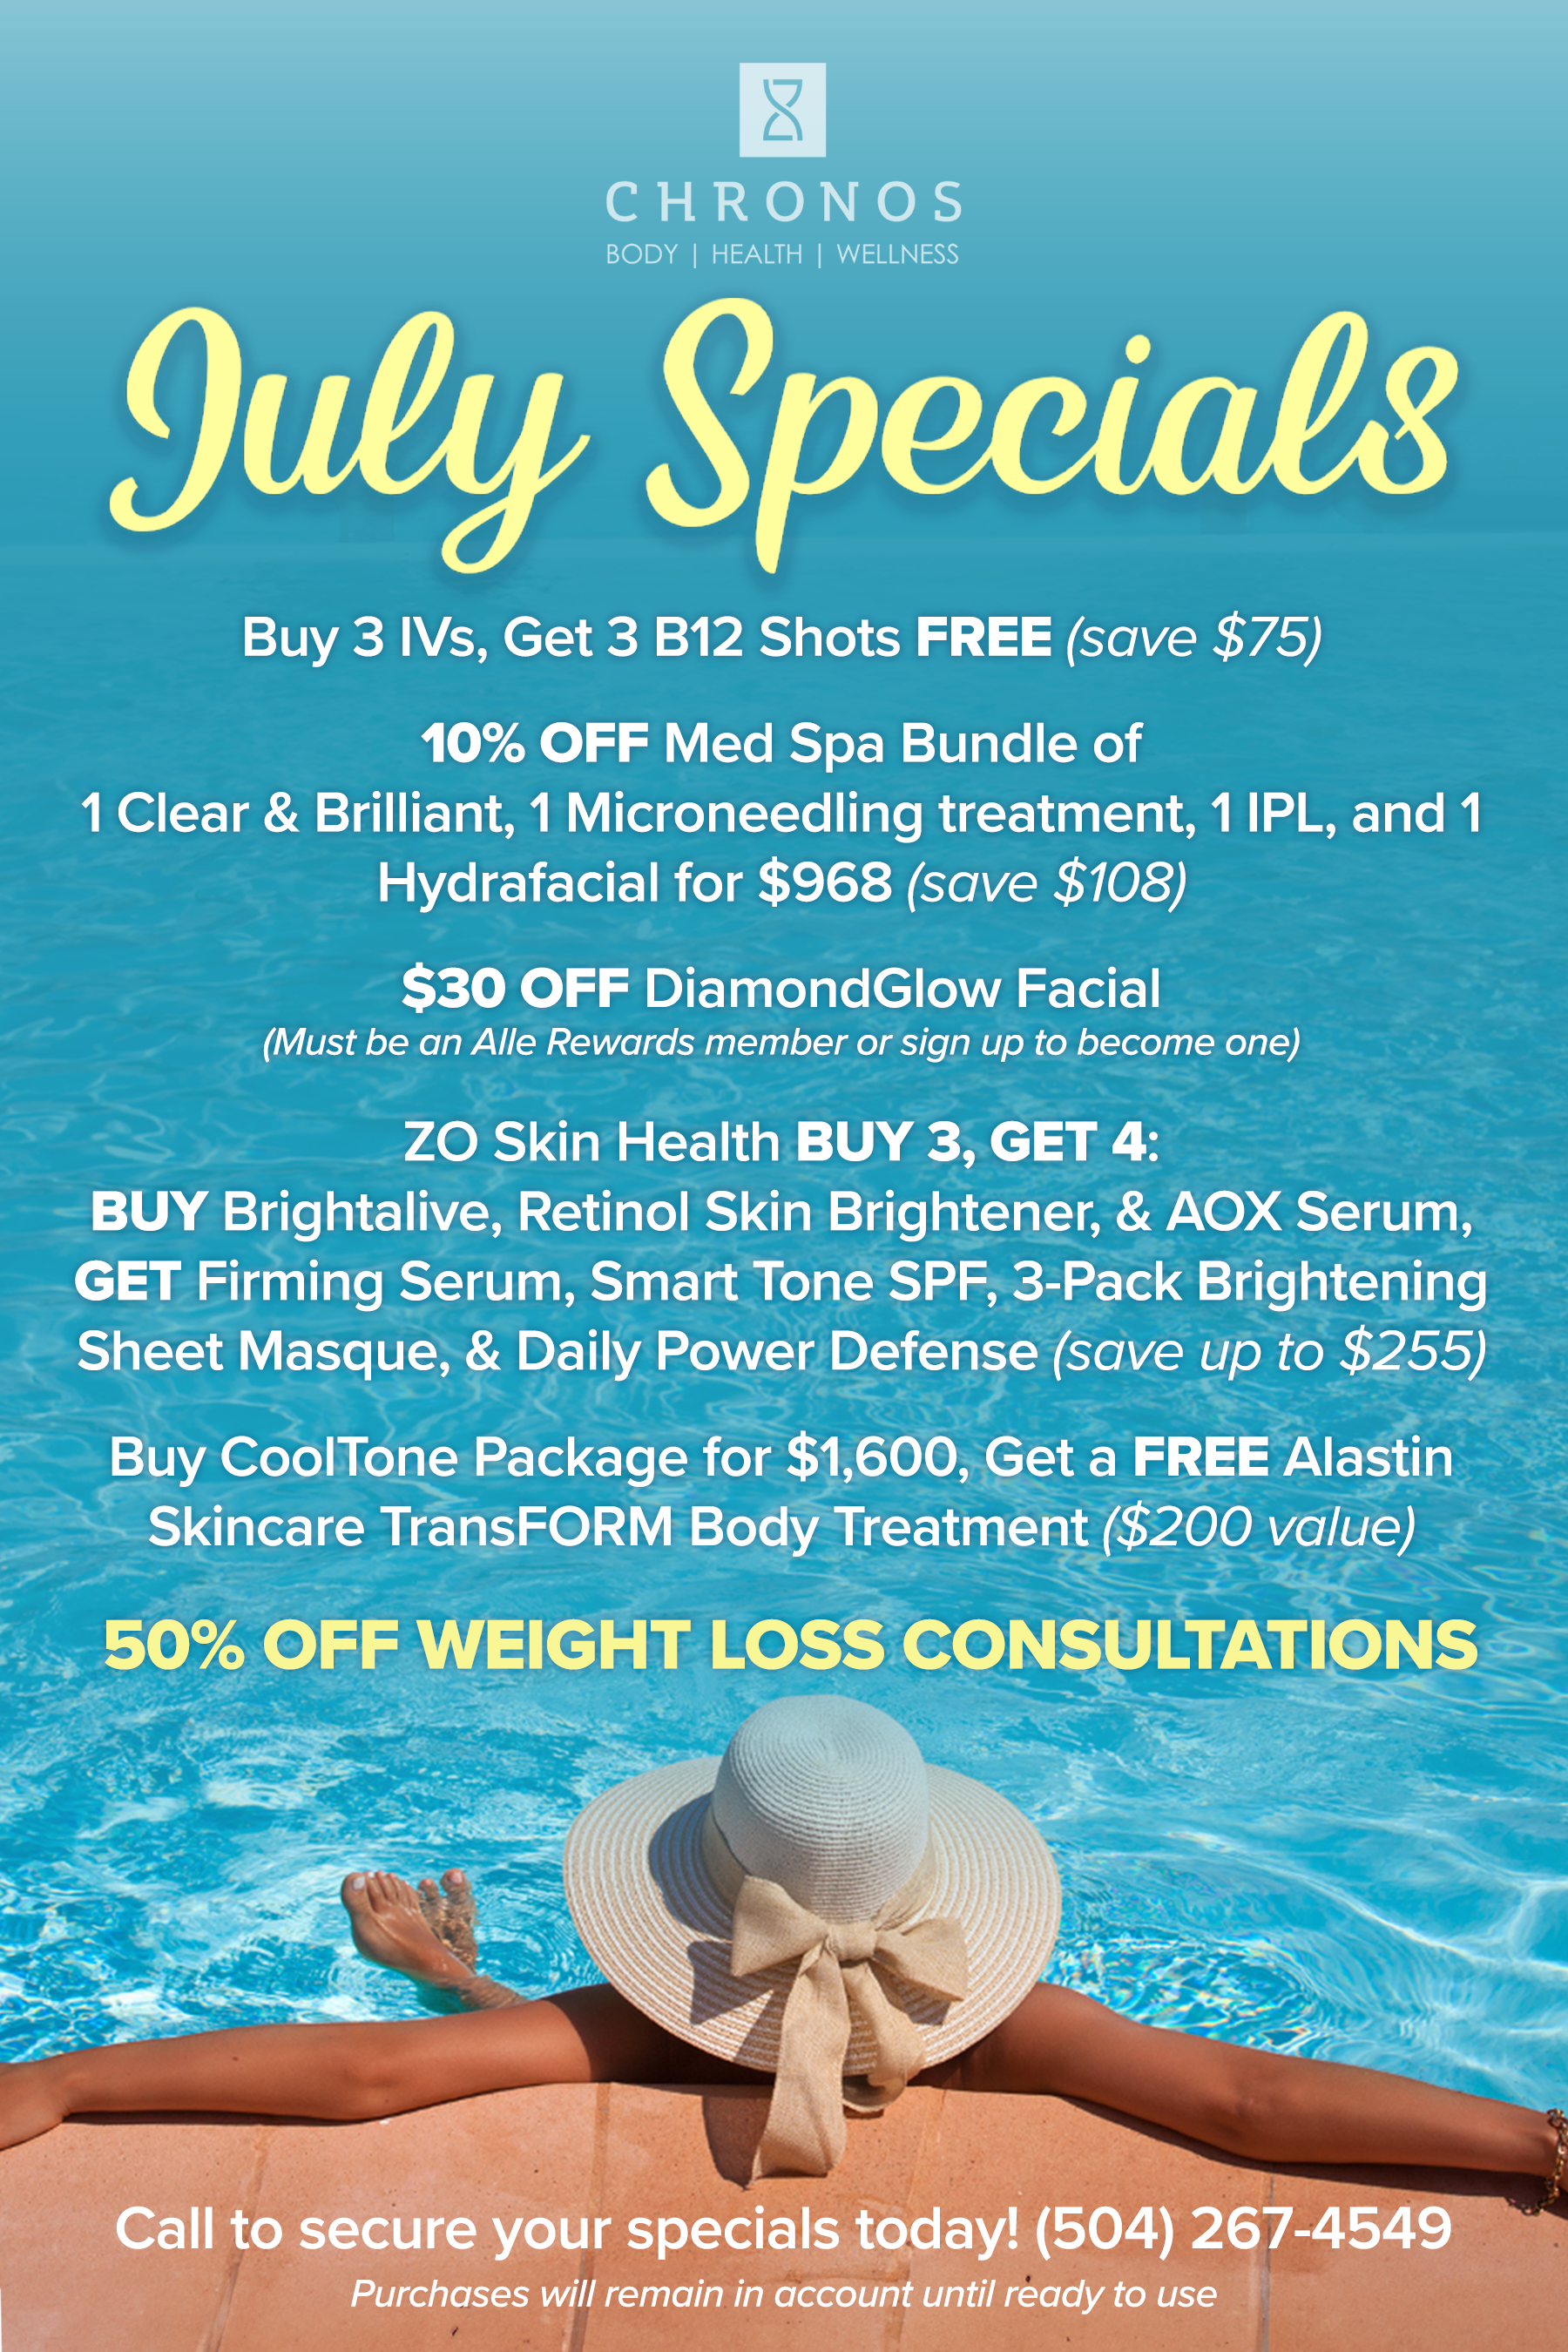 February Specials at Chronos Body Health & Wellness in Metairie, LA